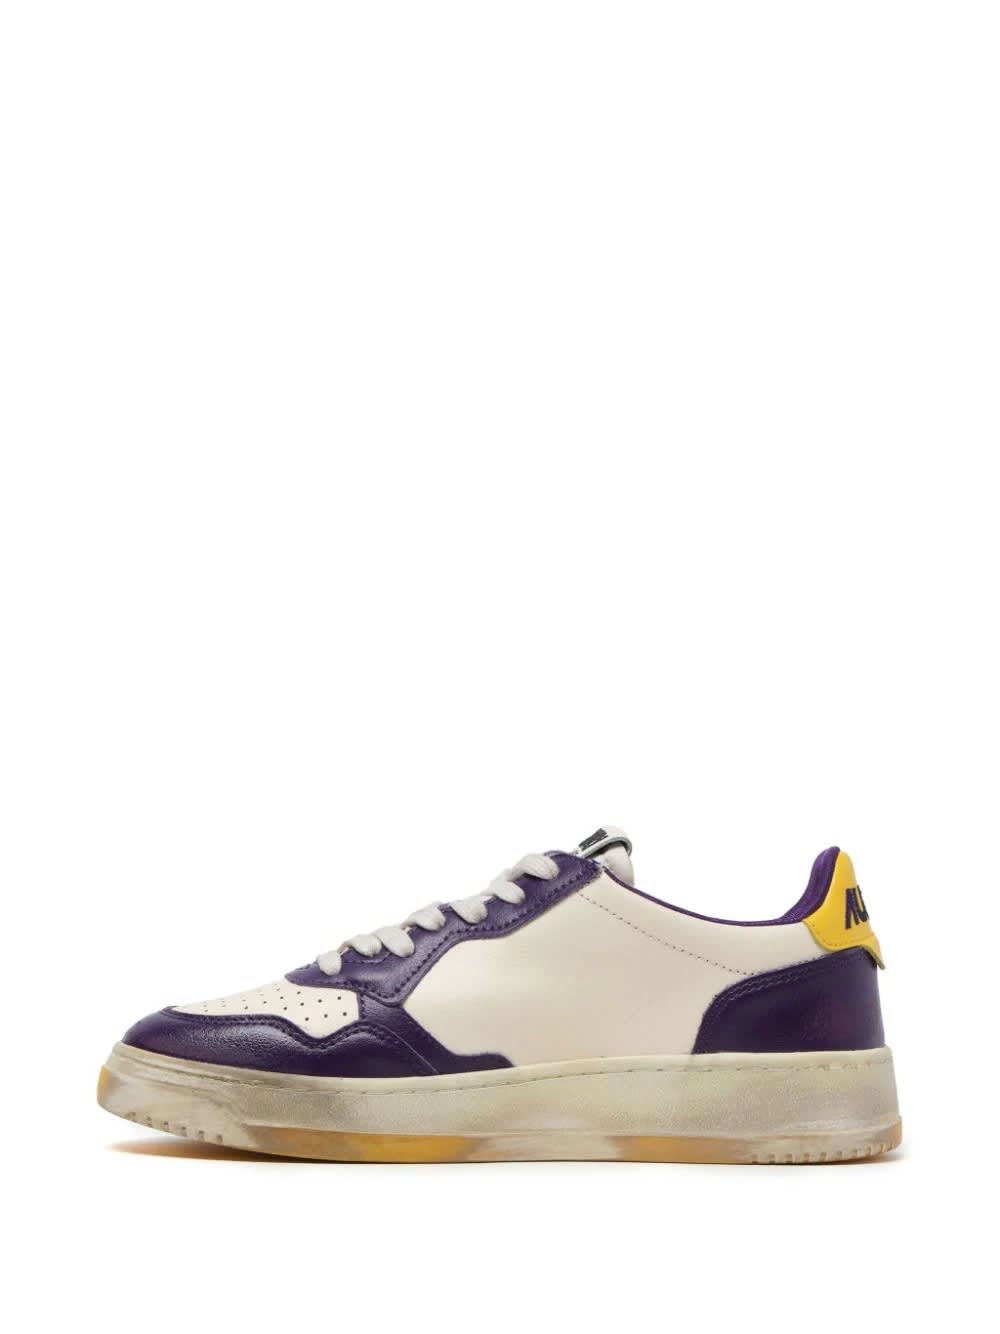 Shop Autry Super Vintage Medalist Low Sneakers In White And Purple Leather